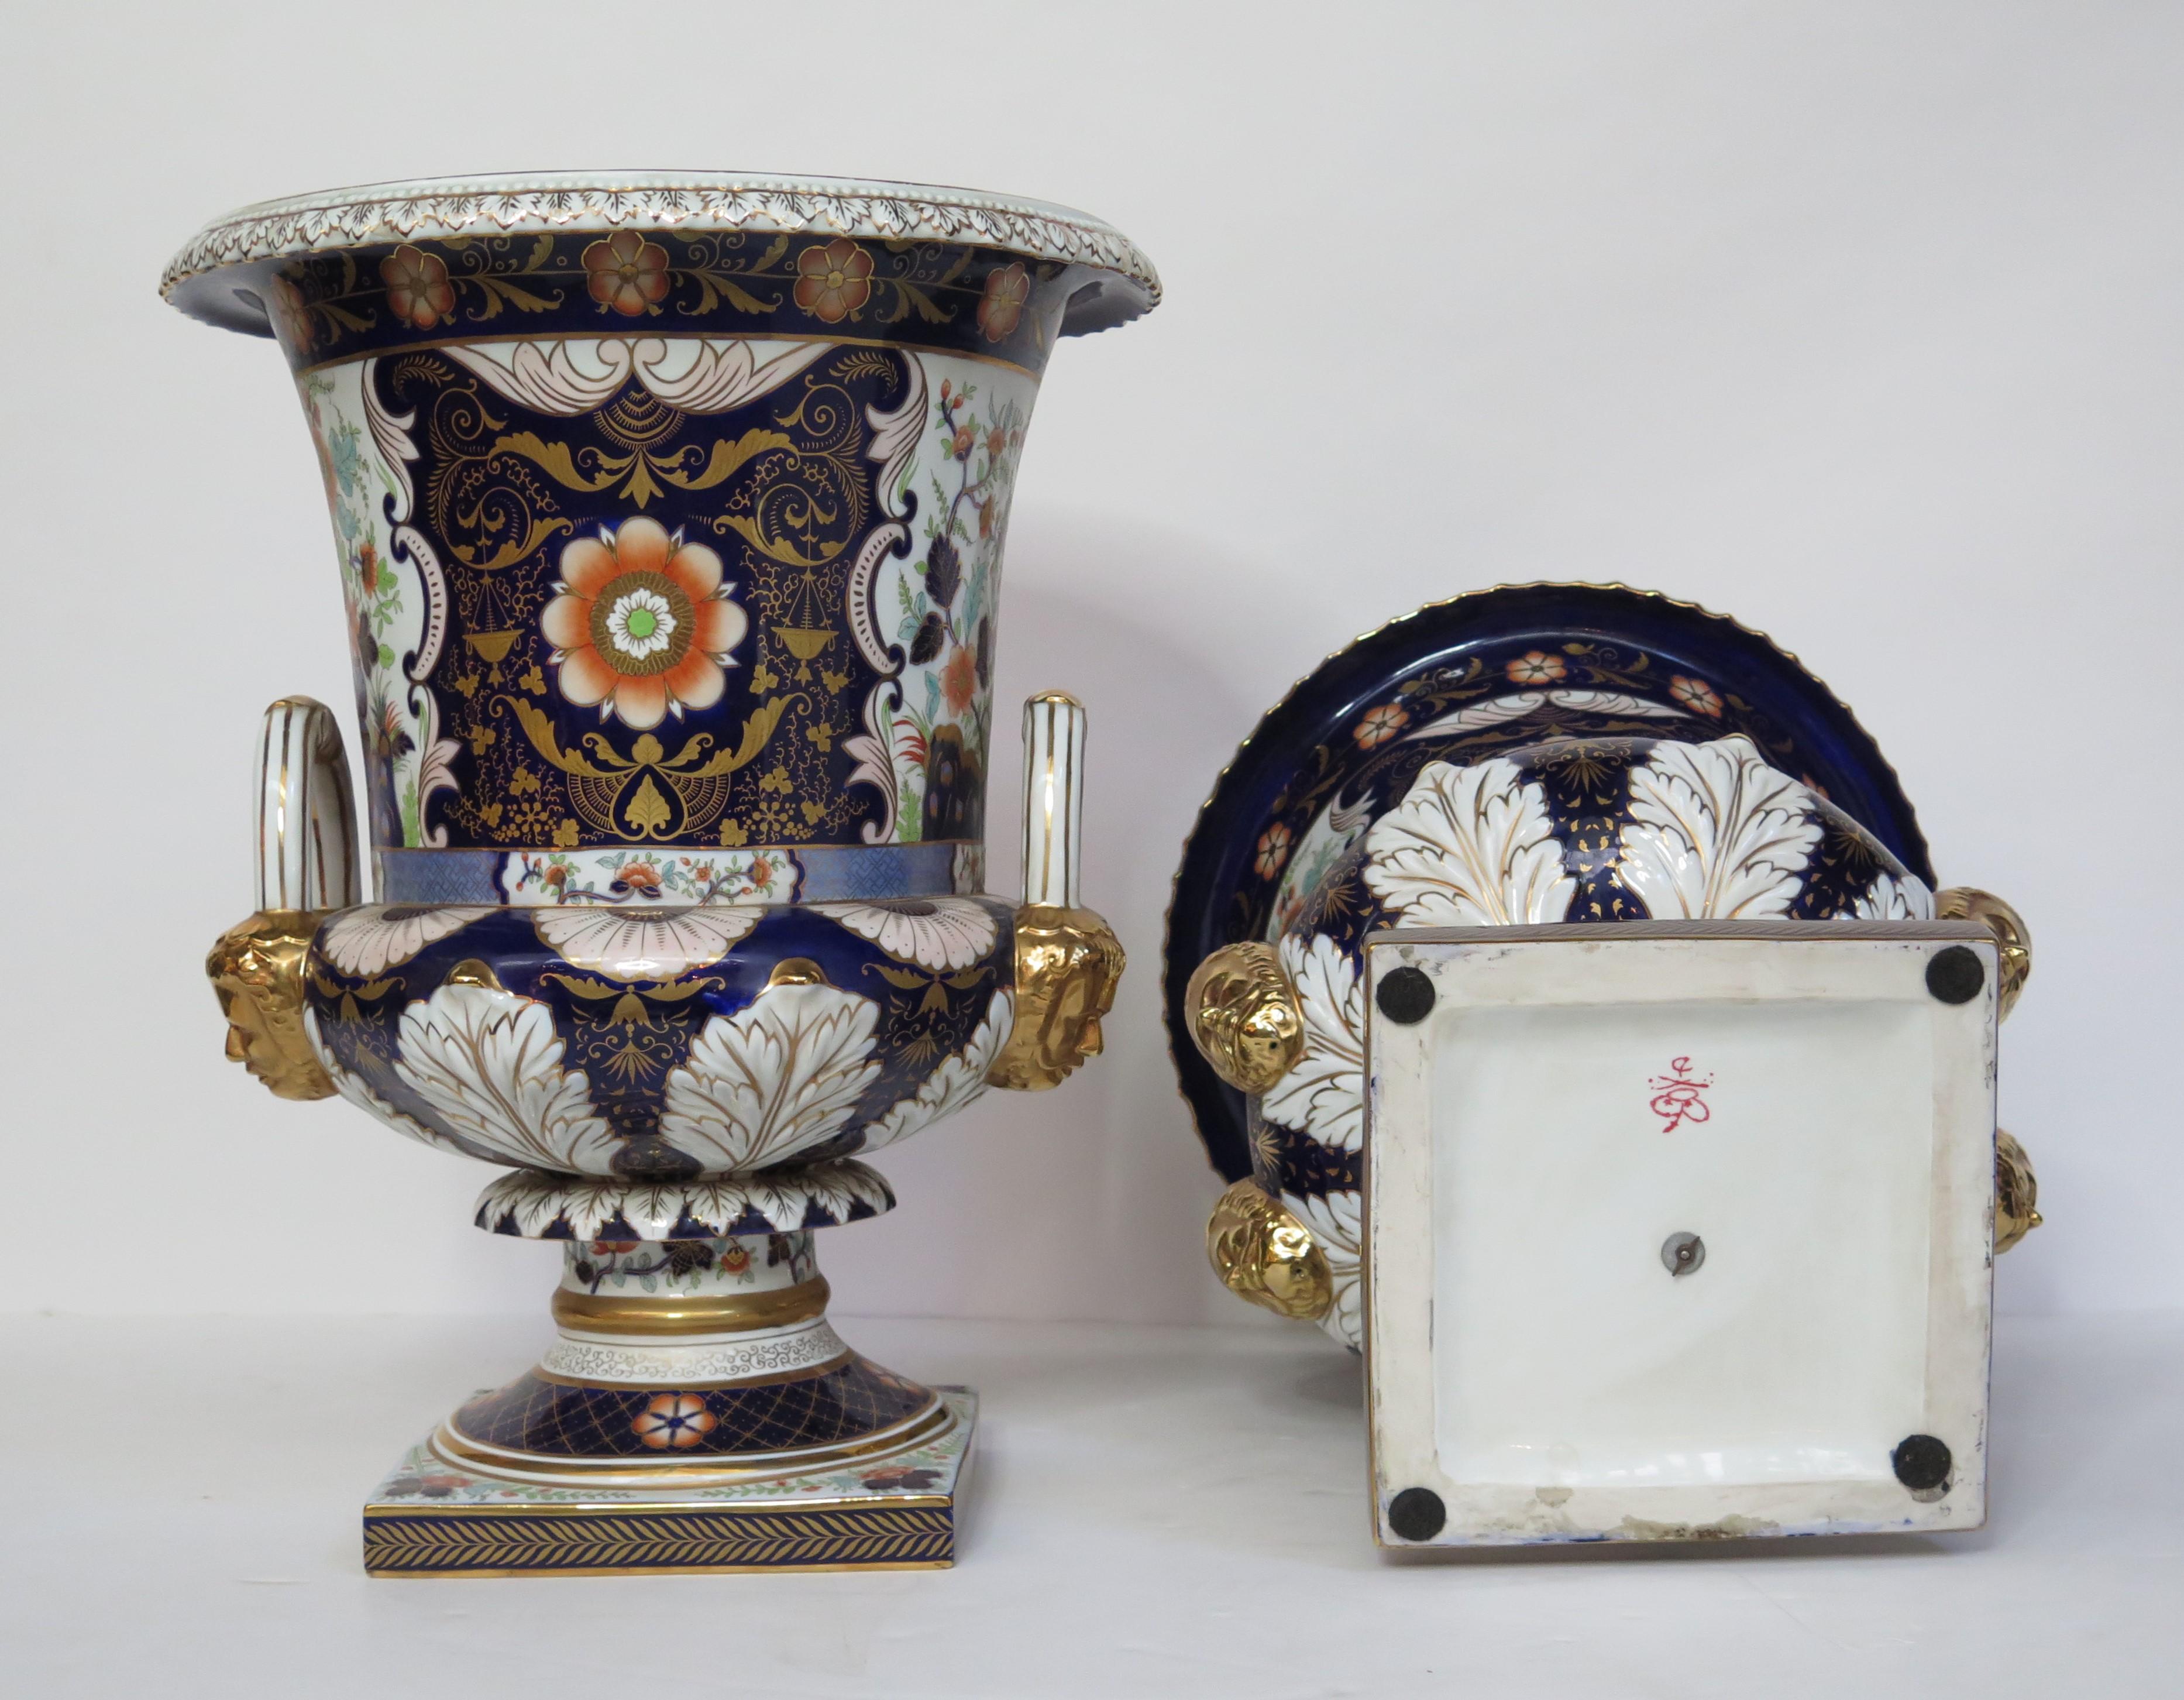 Hand-Painted Large Scale Pair of Royal Crown Derby Style Campana Urns